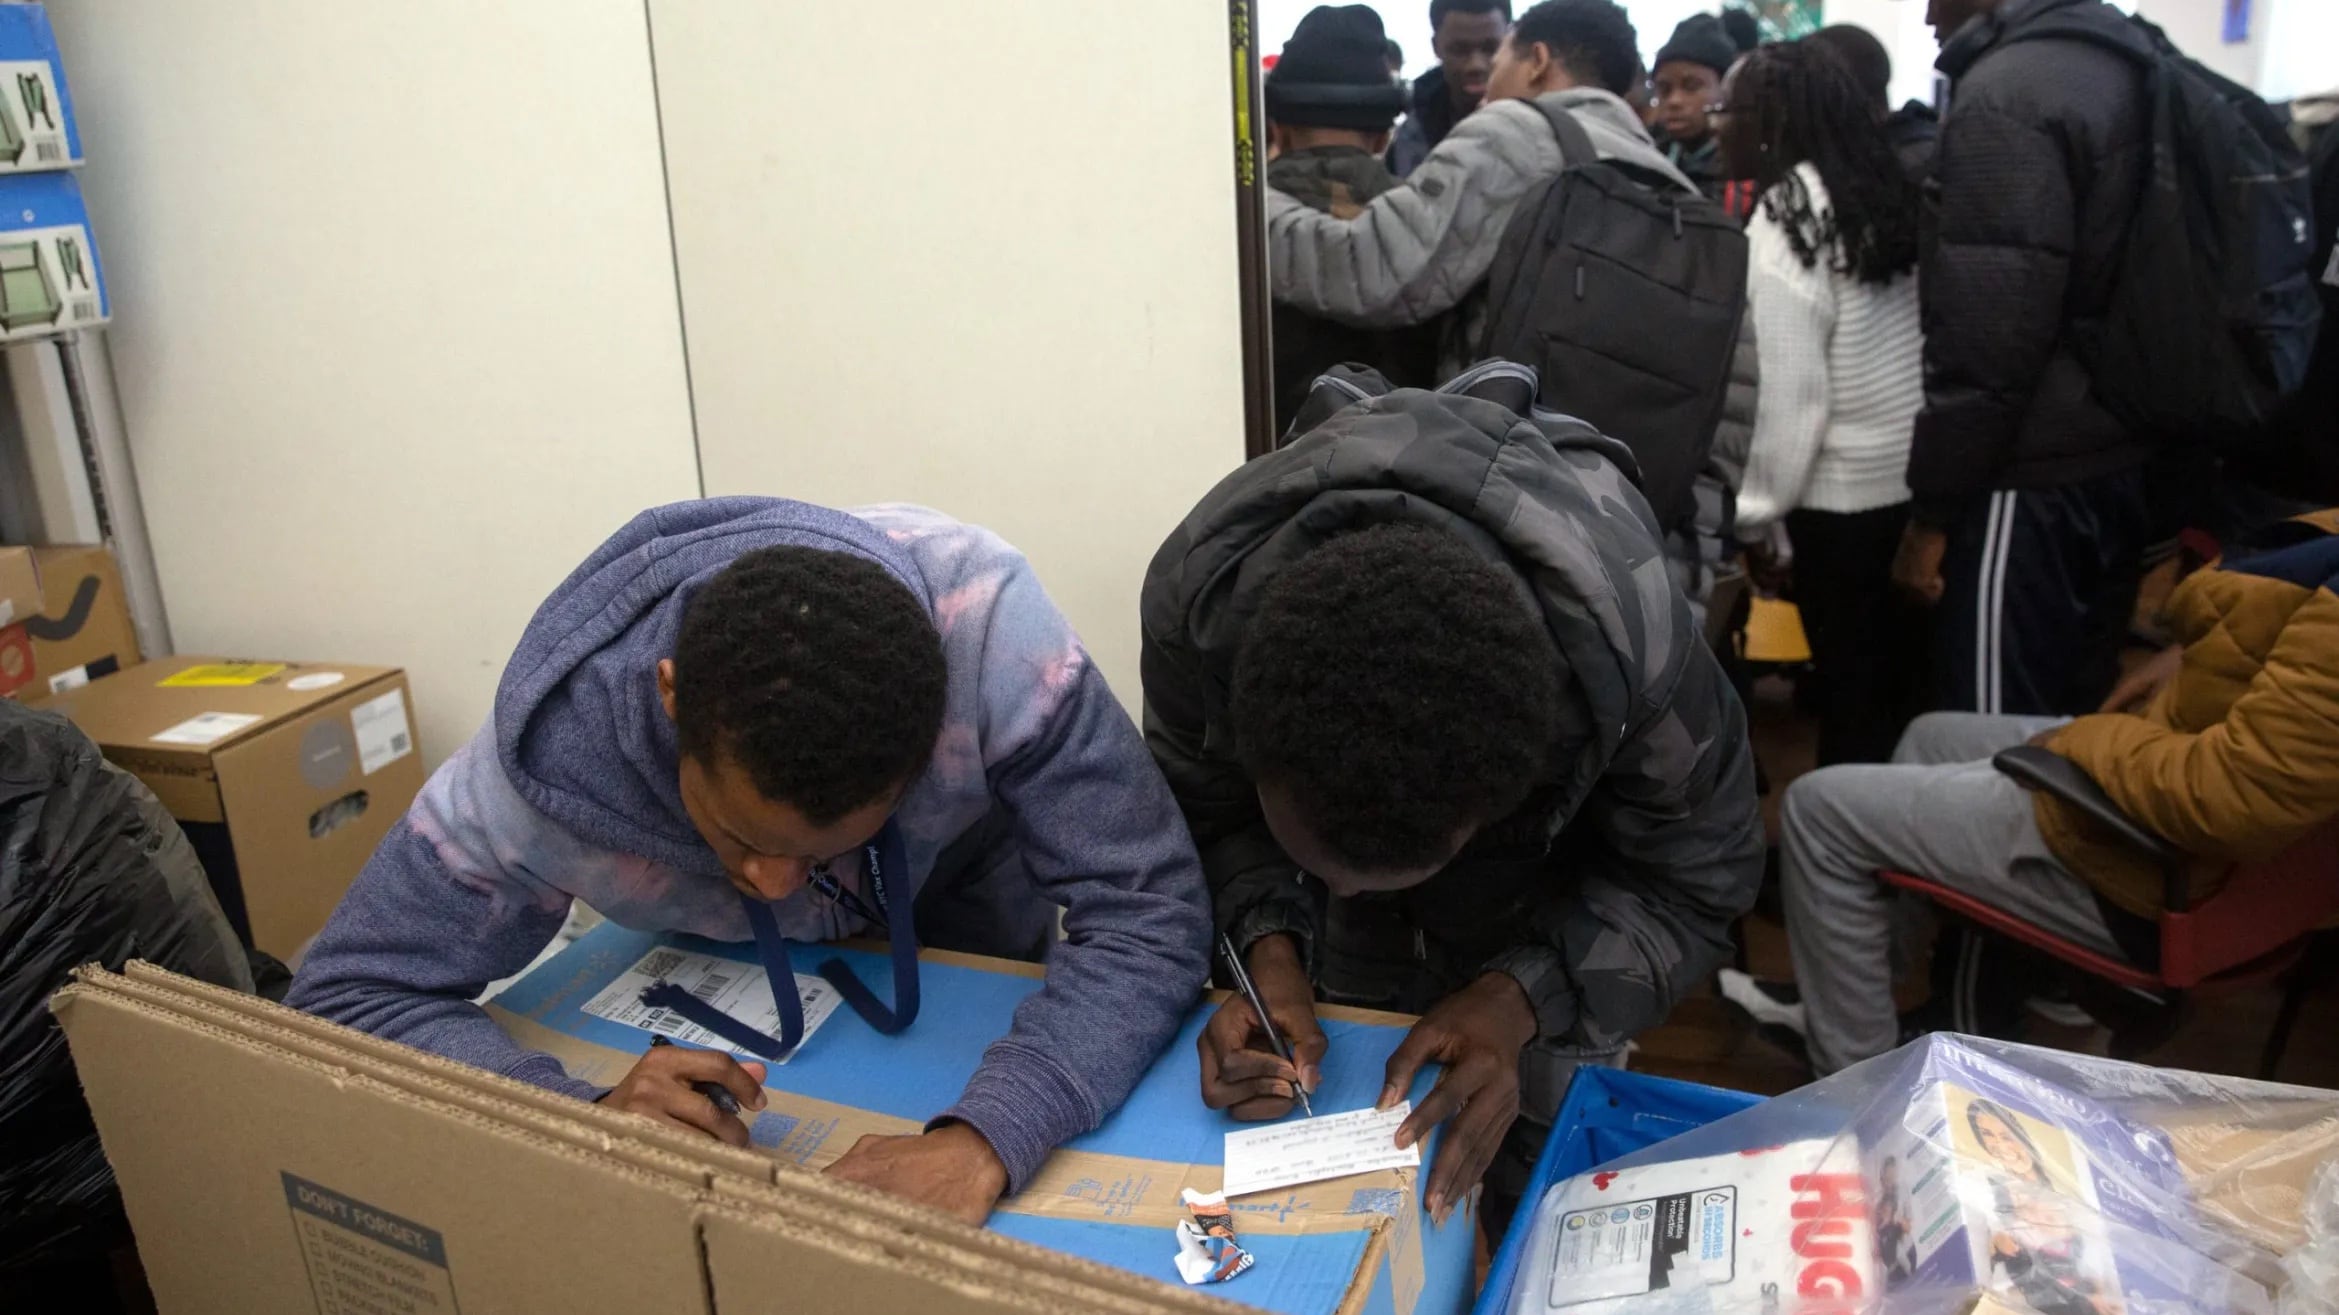 Two young people are huddled over a desk filling out paperwork, while another group is standing in the background.